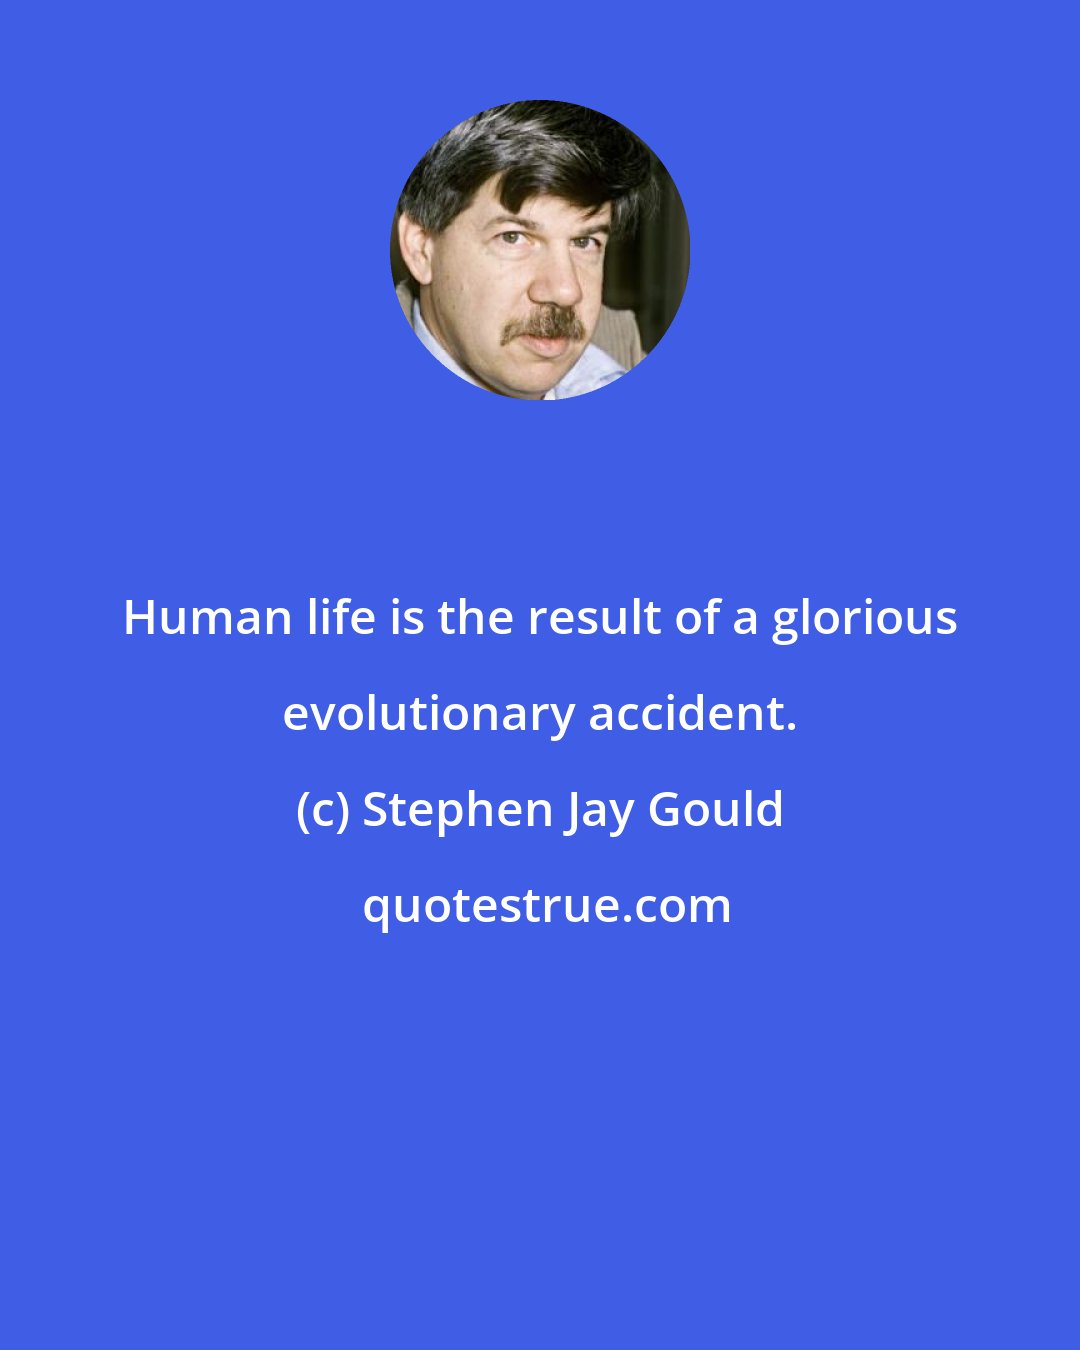 Stephen Jay Gould: Human life is the result of a glorious evolutionary accident.